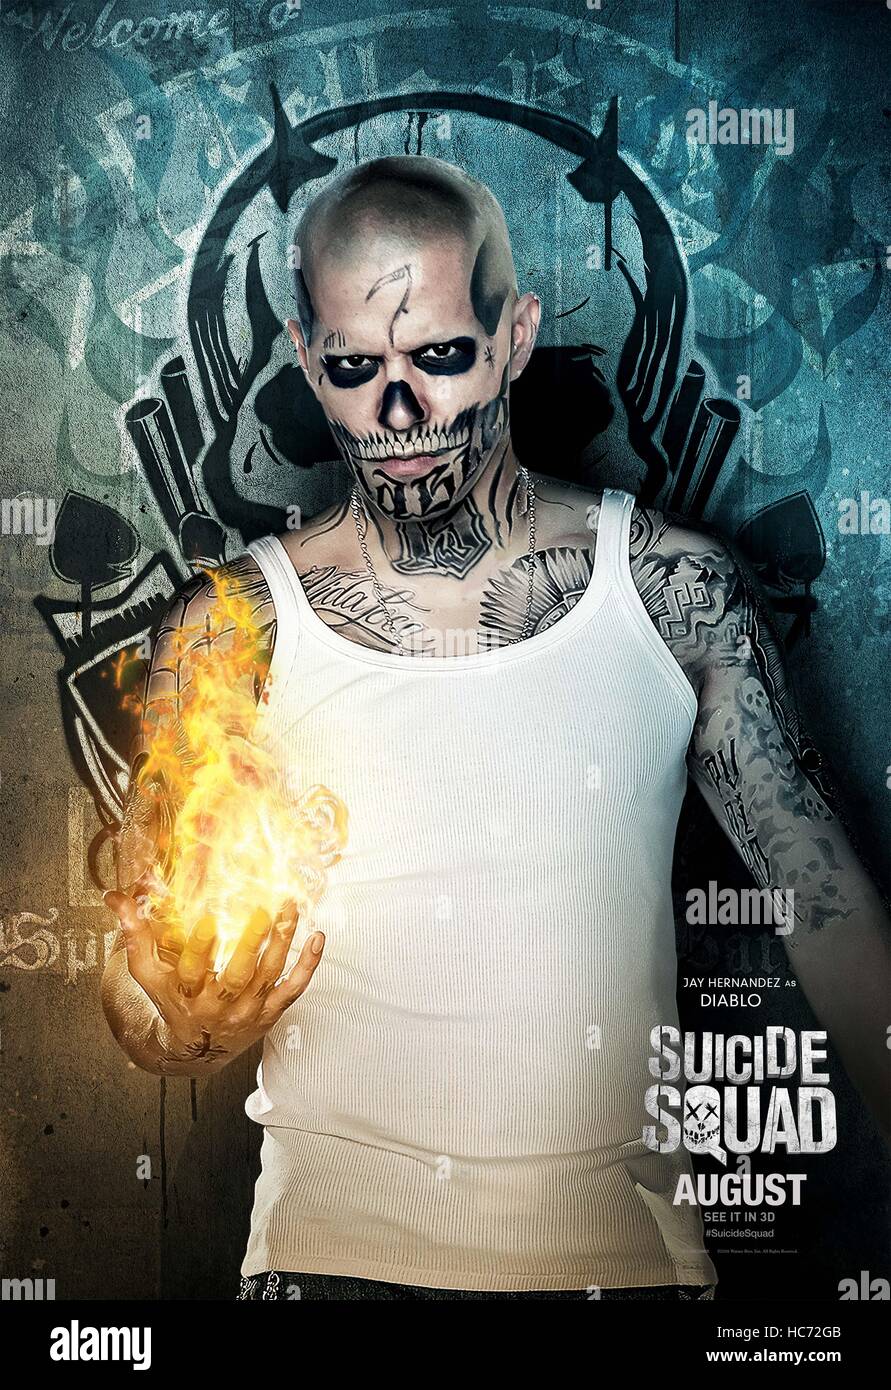 RELEASE DATE: August 5, 2016 TITLE: Suicide Squad STUDIO: Atlas Entertainment DIRECTOR: David Ayer PLOT: A secret government agency recruits imprisoned supervillains to execute dangerous black ops missions in exchange for clemency STARRING: Jay Hernandez as Diablo poster (Credit Image: c Atlas Entertainment/Entertainment Pictures/) Stock Photo